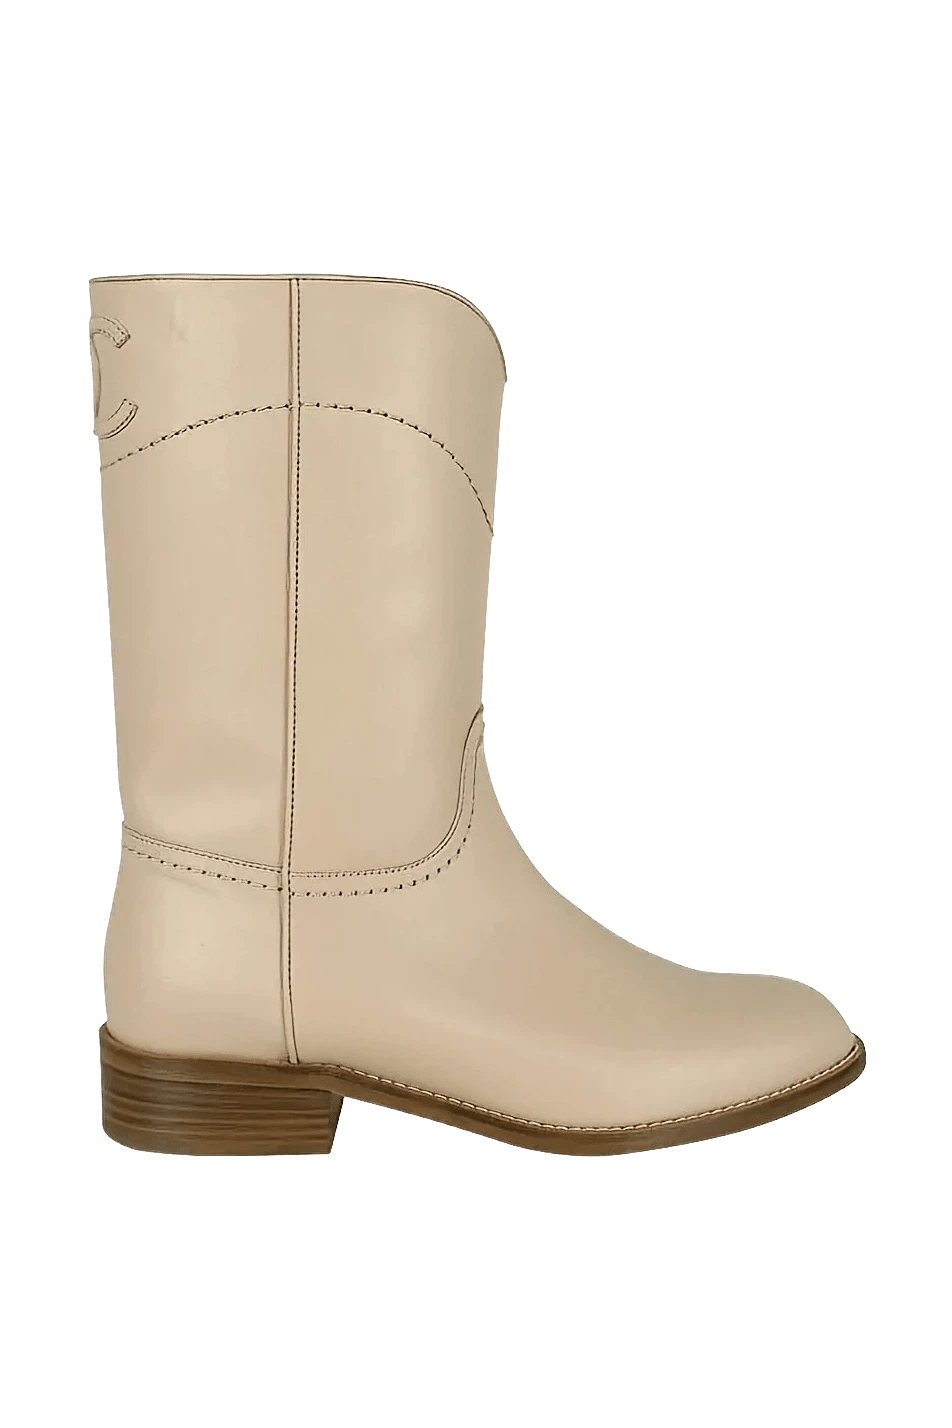 Chanel Beige Half Height Cowboy Boots 6.5 - Foxy Couture Carmel